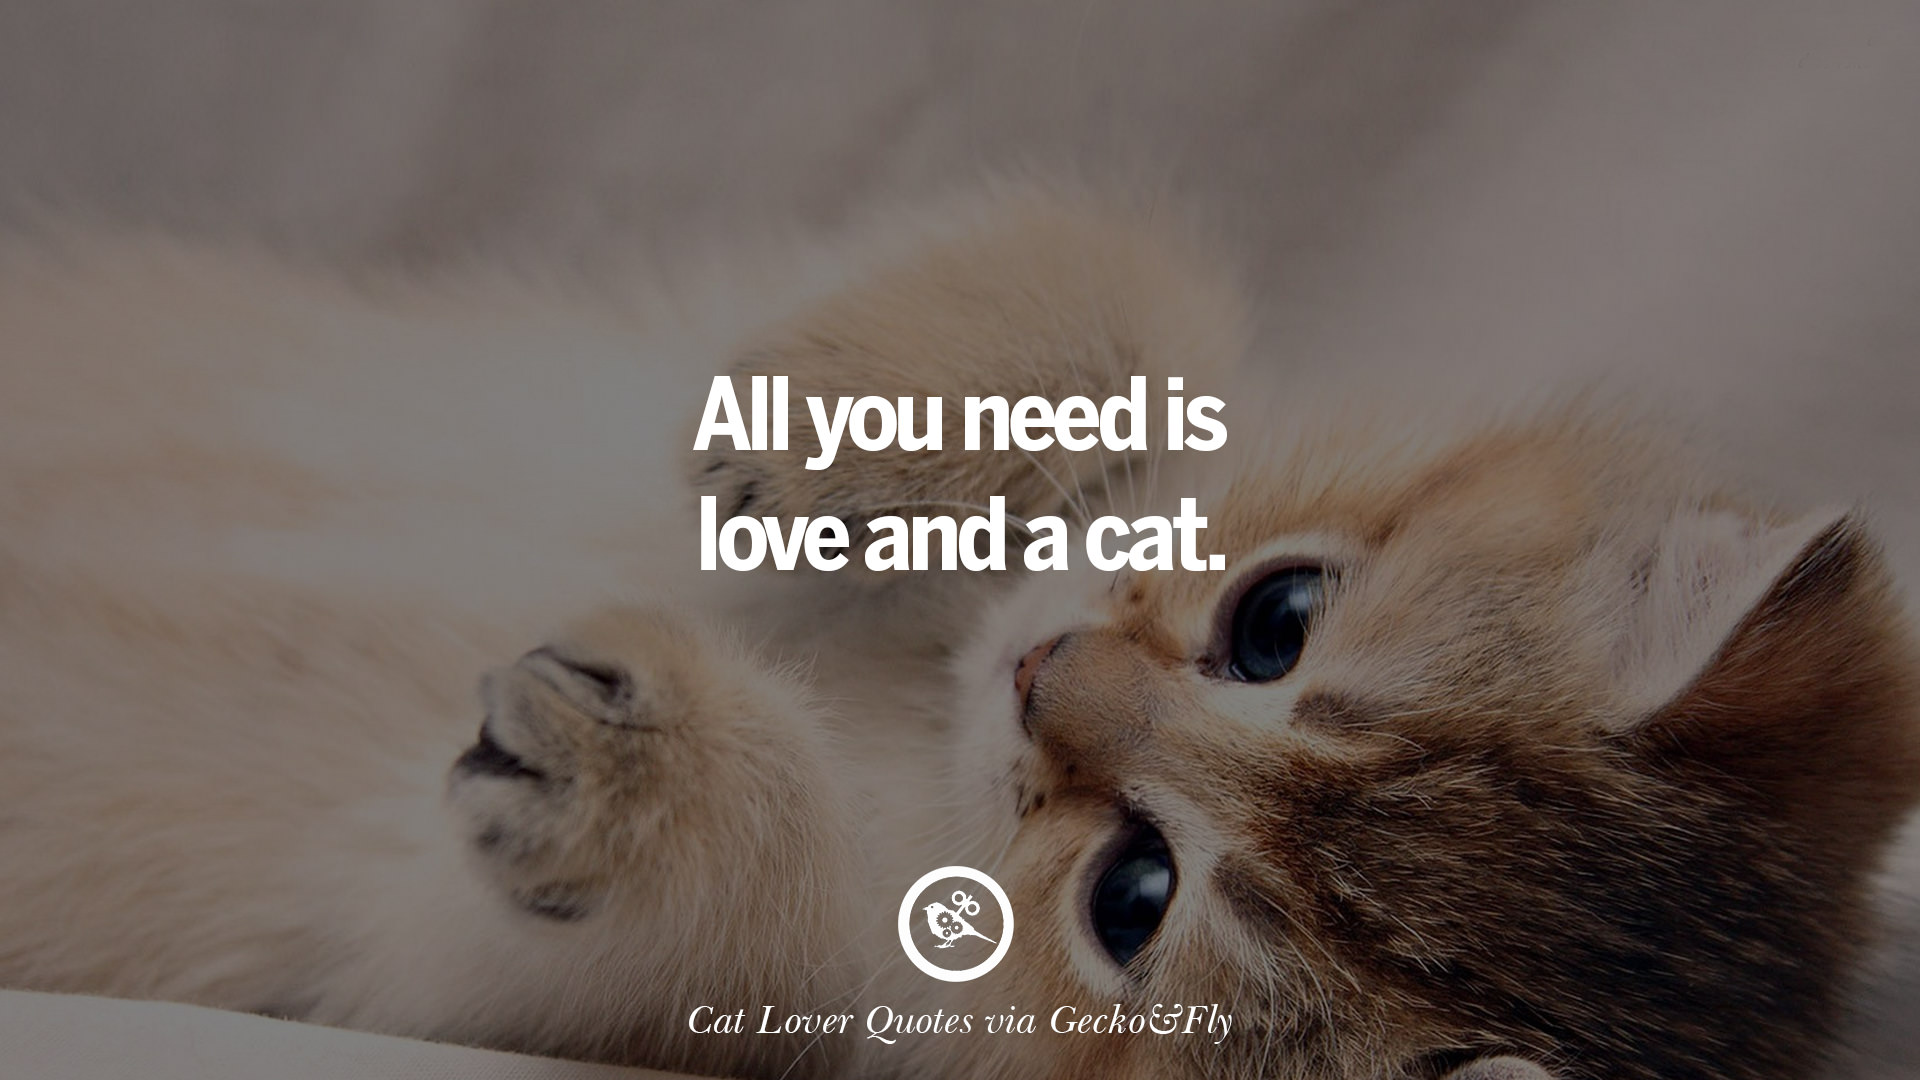 All you need is love and a cat